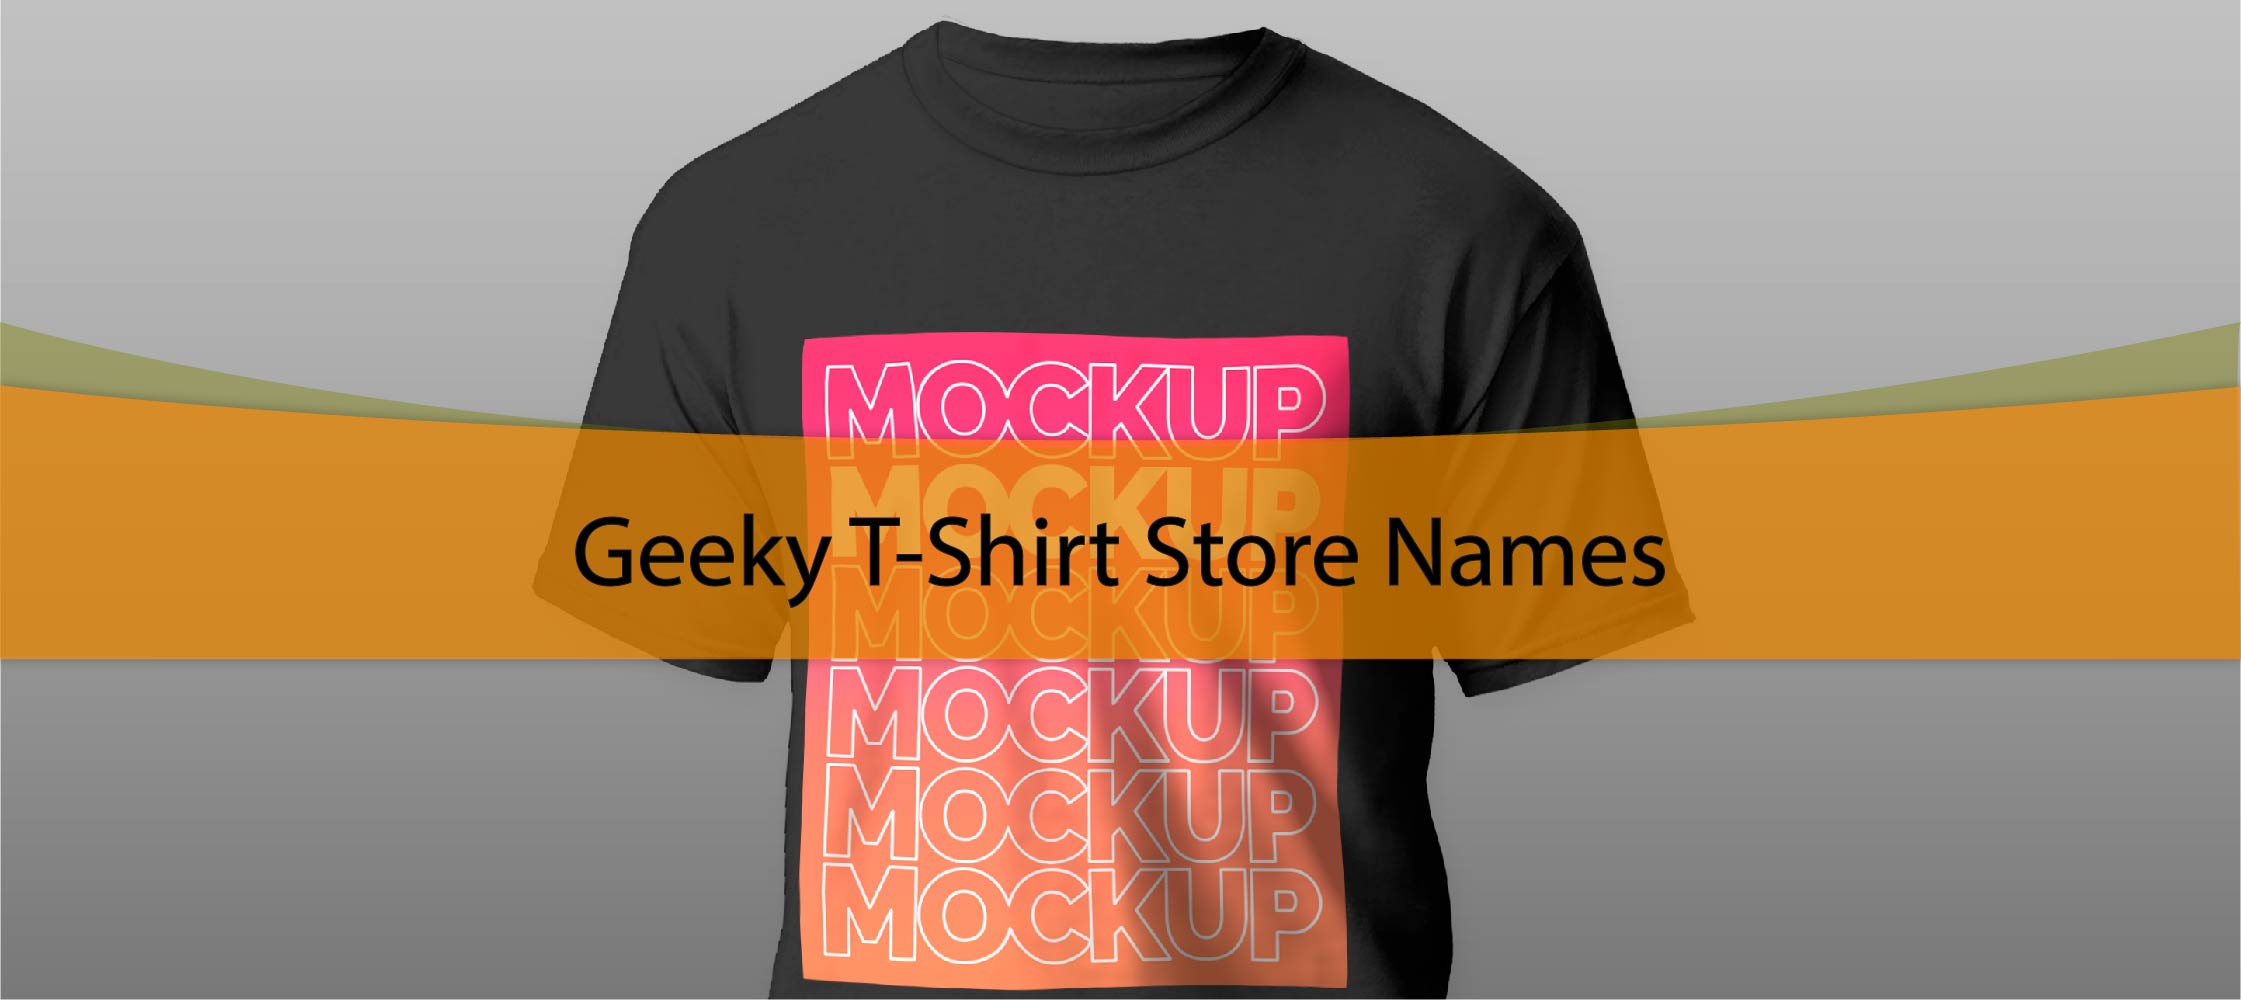 Geeky T-Shirt Store Names